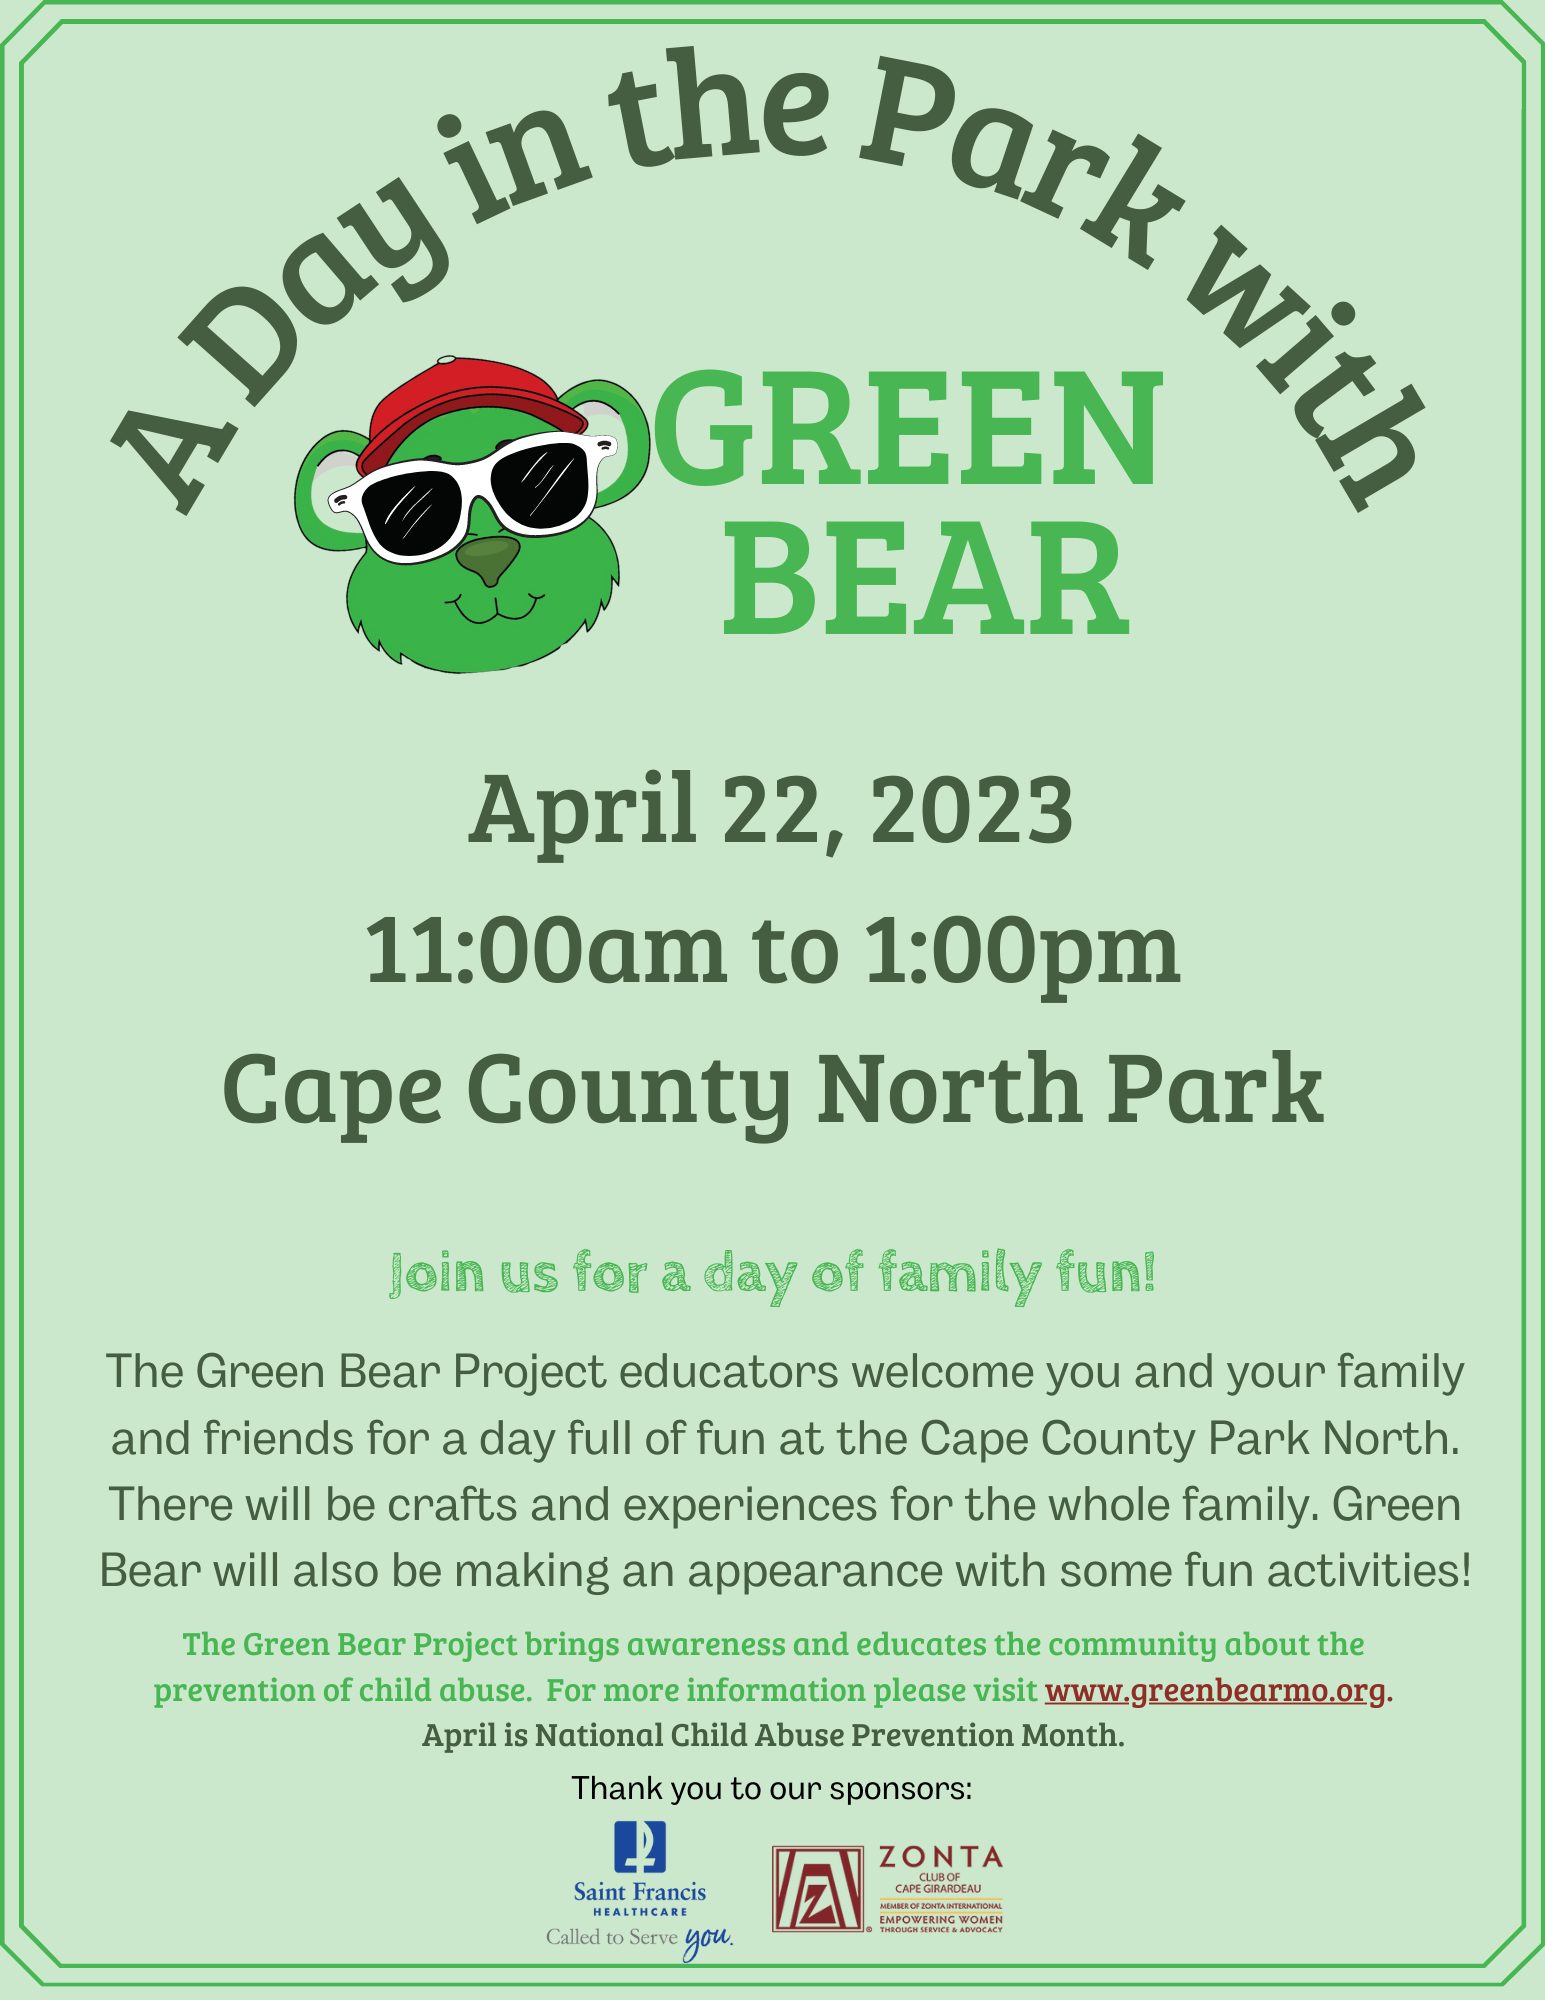 A Day in the Park with Green Bear 2023 - Sponsors